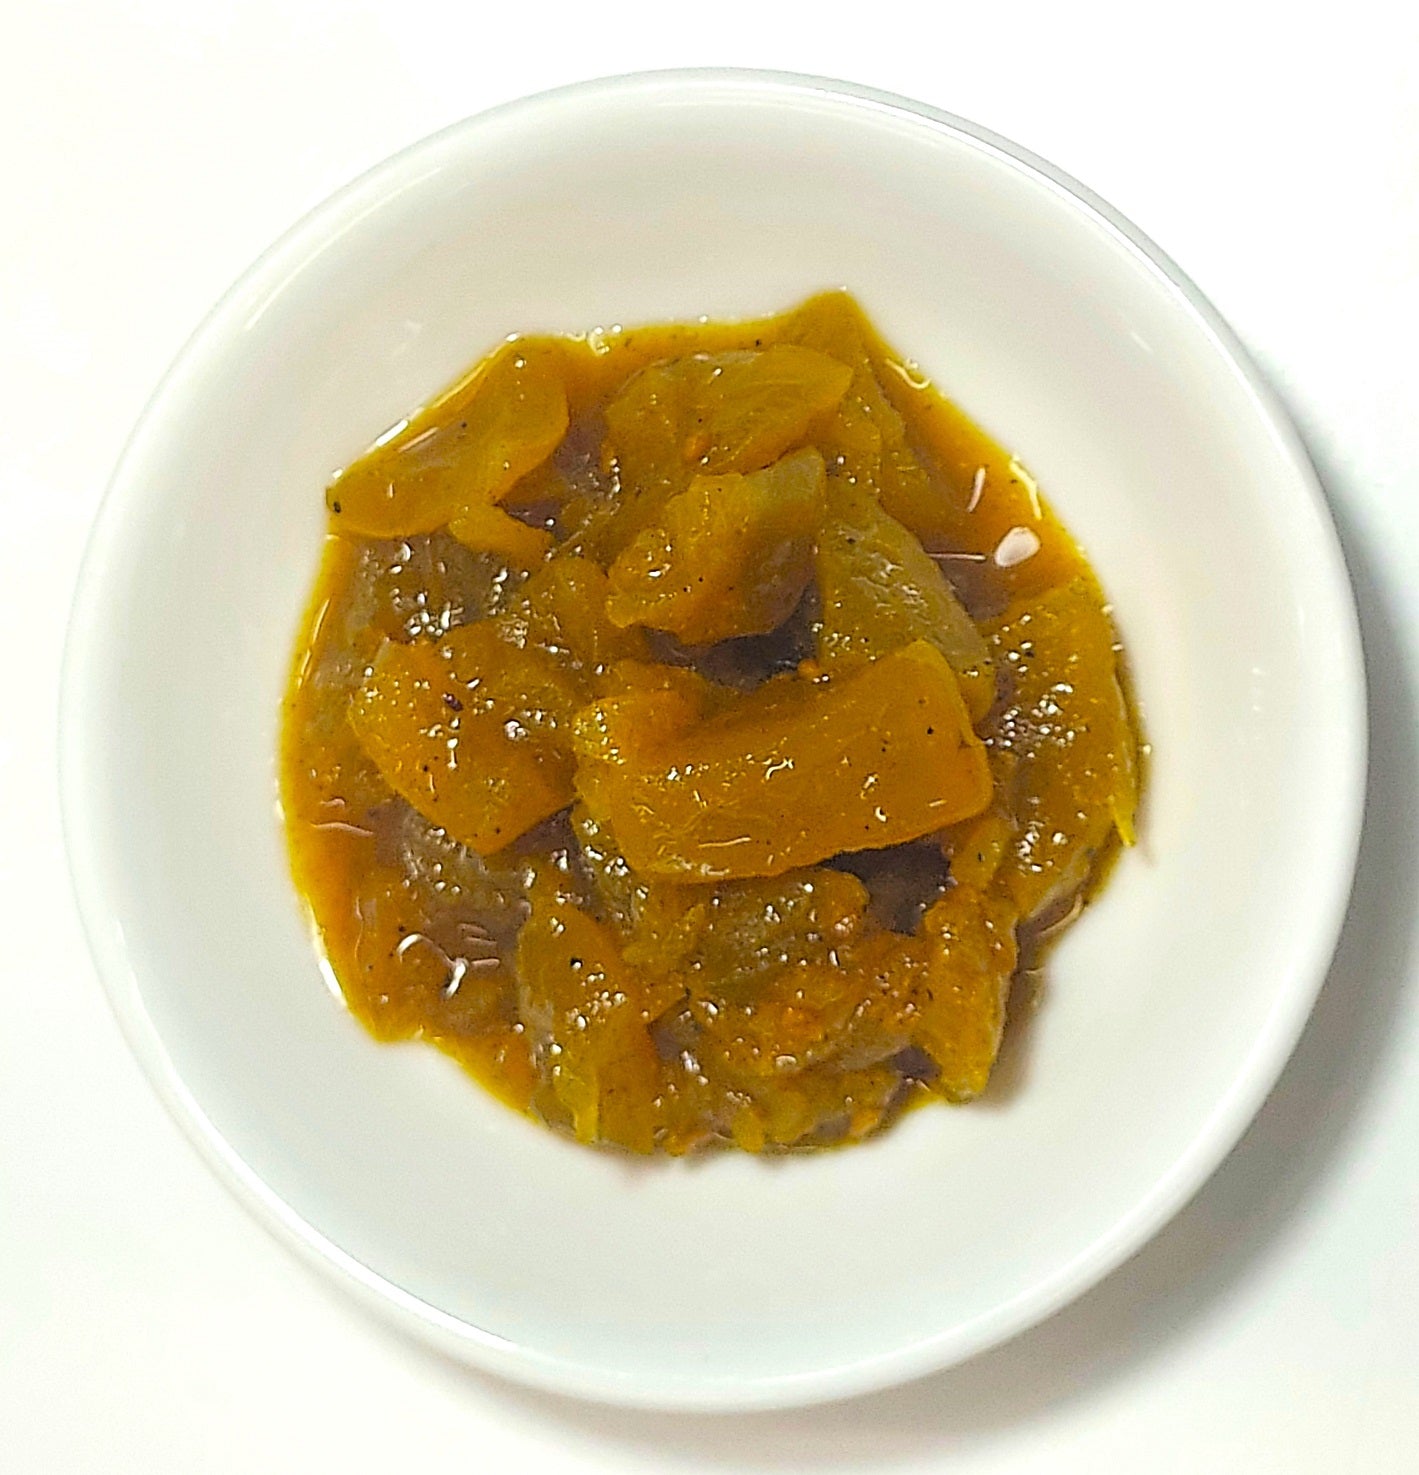 Range Tasmania green tomato and pepperberry pickles served in a small white dish